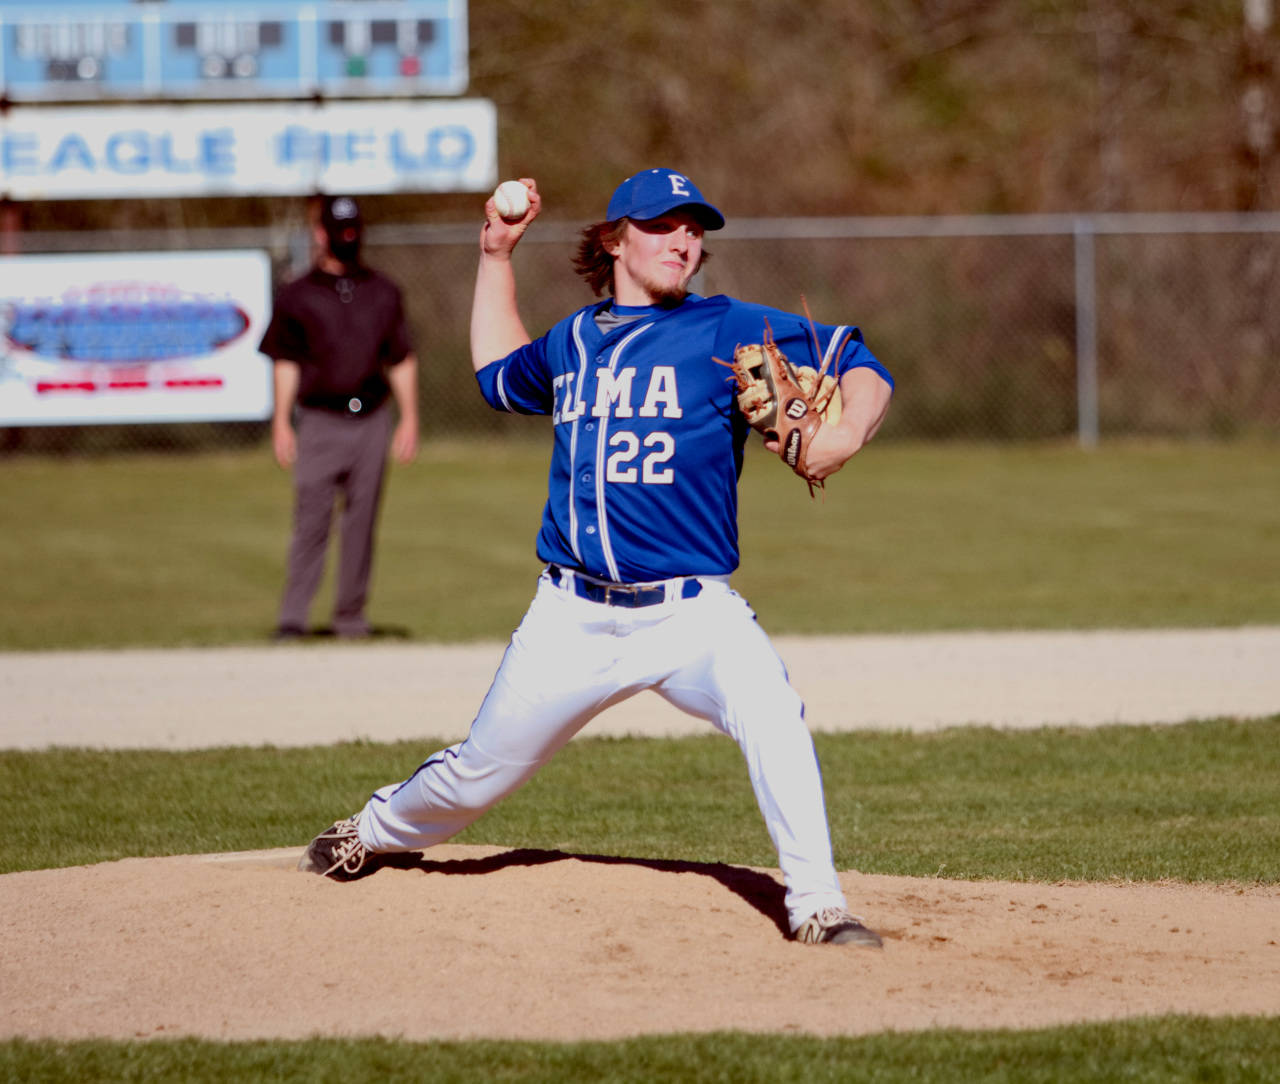 RYAN SPARKS | THE DAILY WORLD Elma starting pitcher Brody Rustemeyer allowed two runs in 6 1-3 innings pitched for a no decision against Montesano on Friday at Eagle Field in Elma.